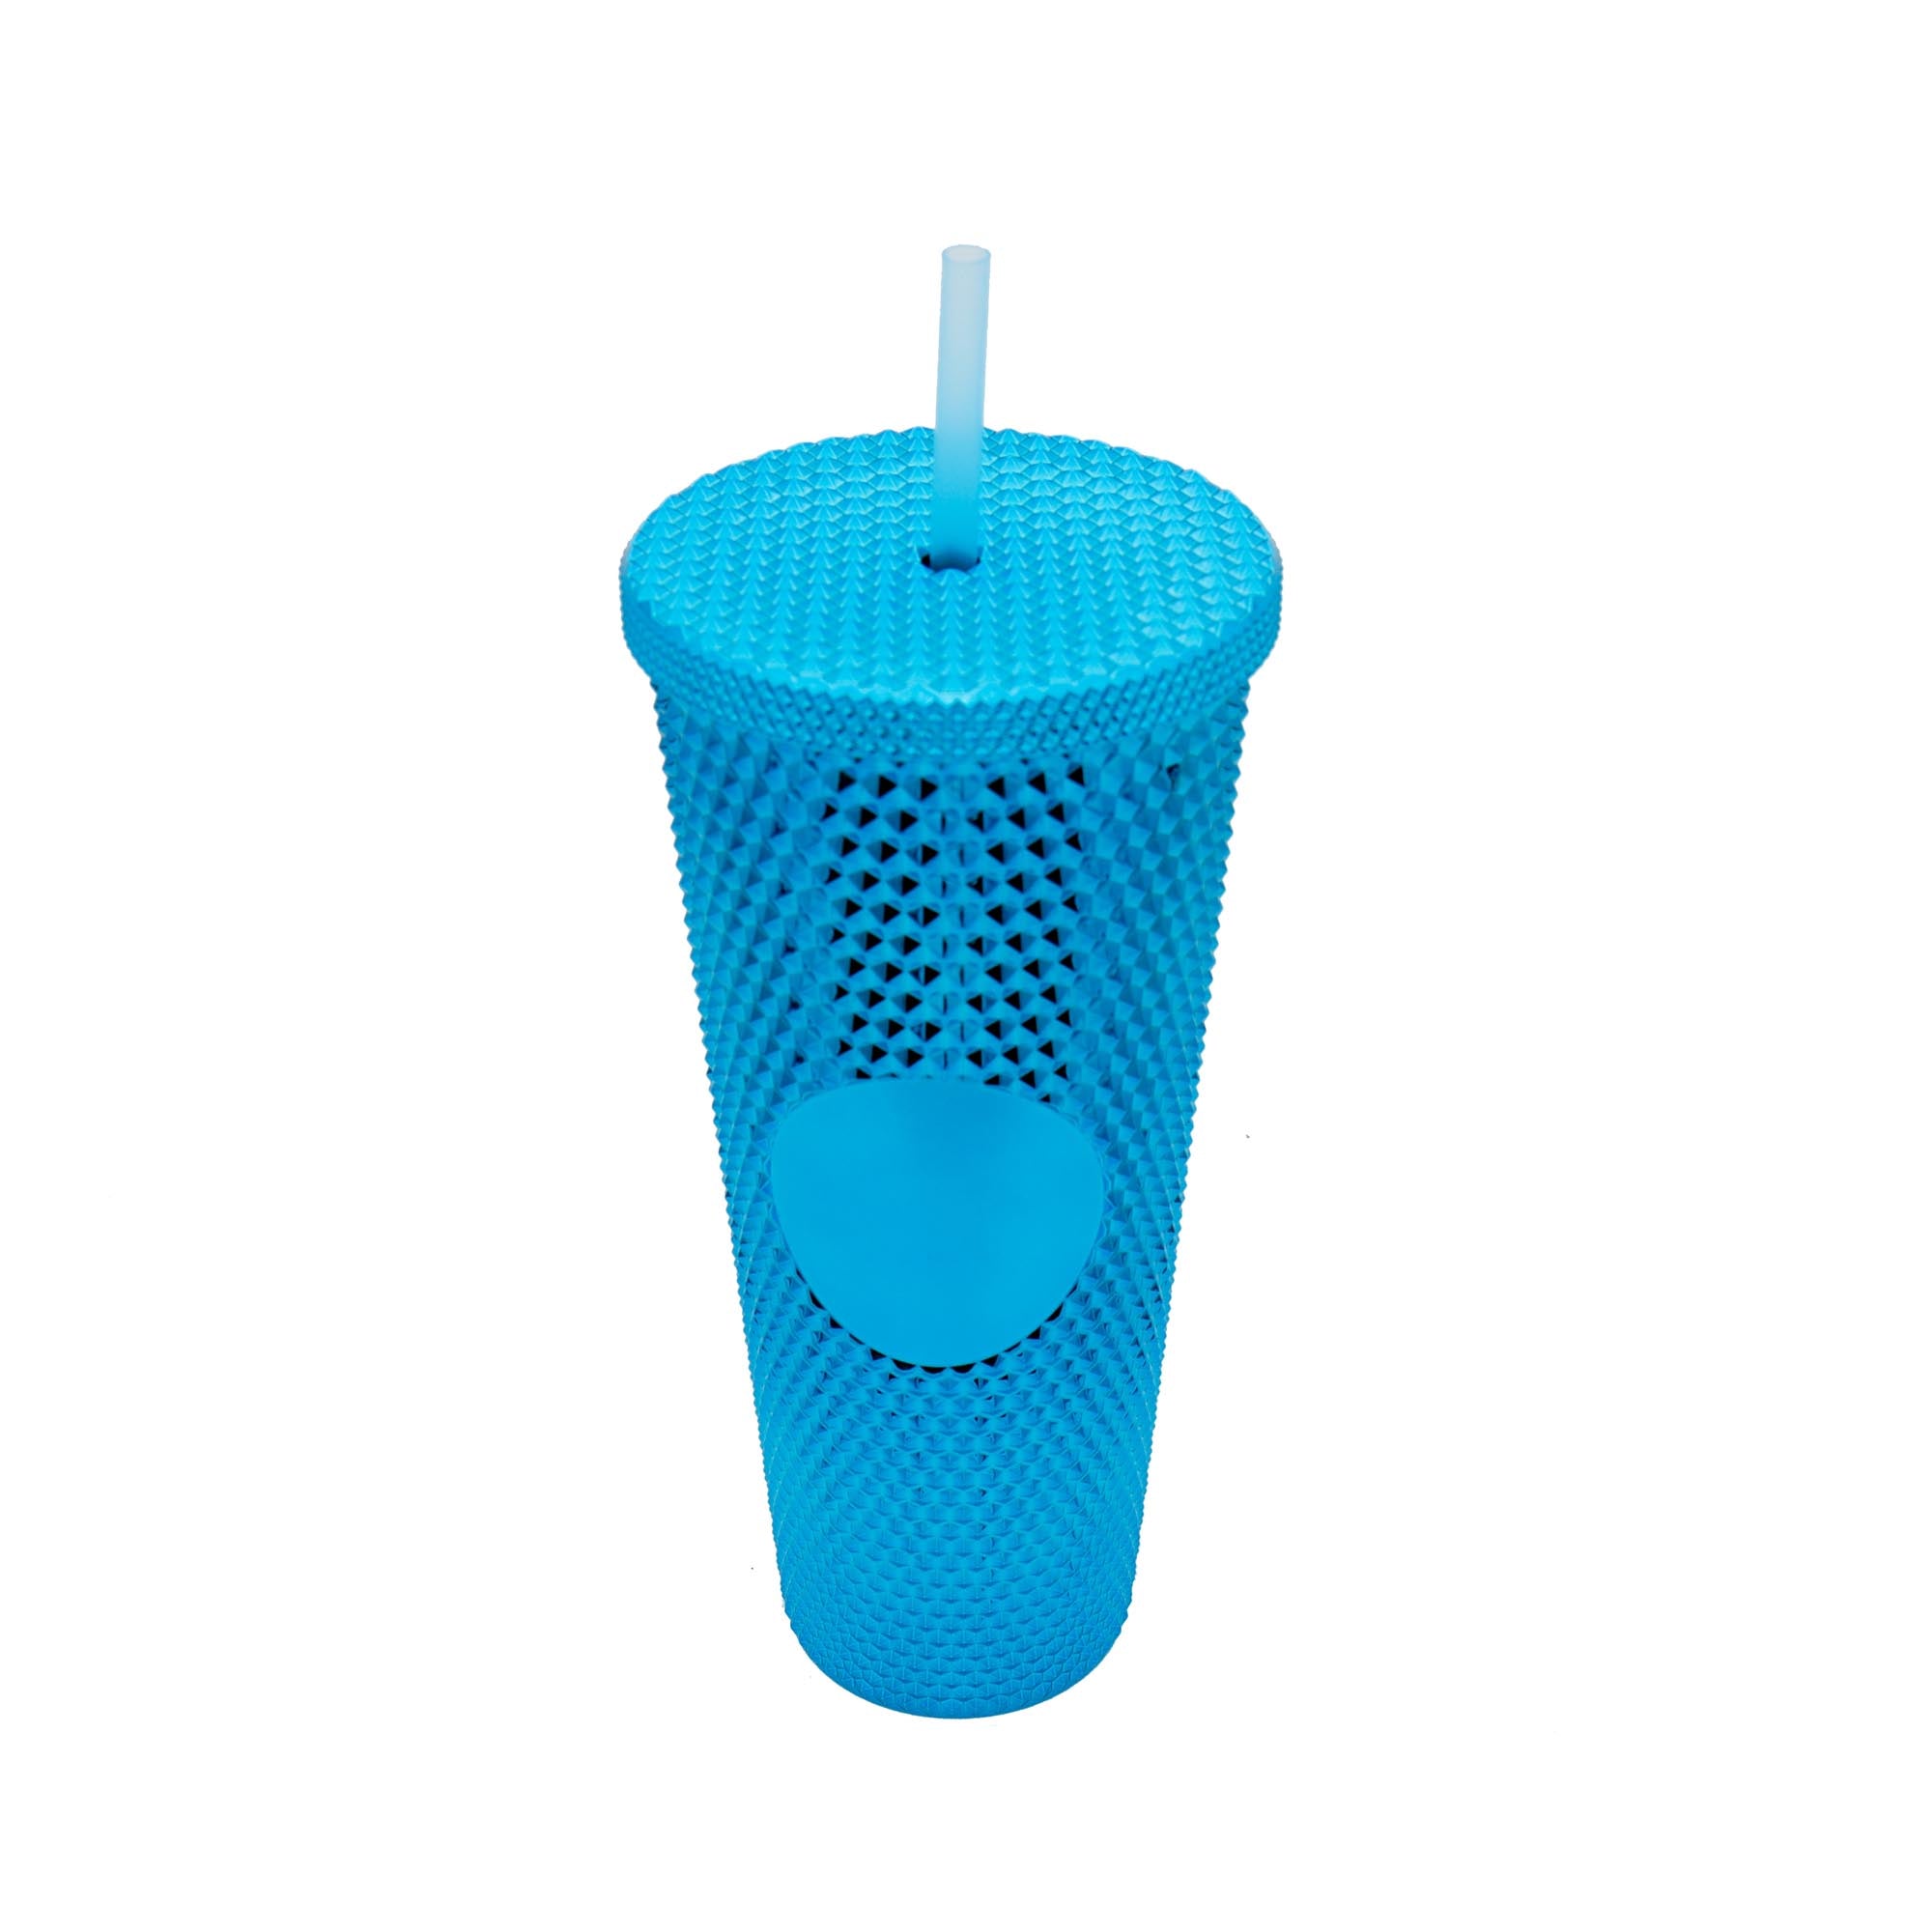 Studded Drinking Tumbler 720ml Smoothie Glitter Cup & Straw